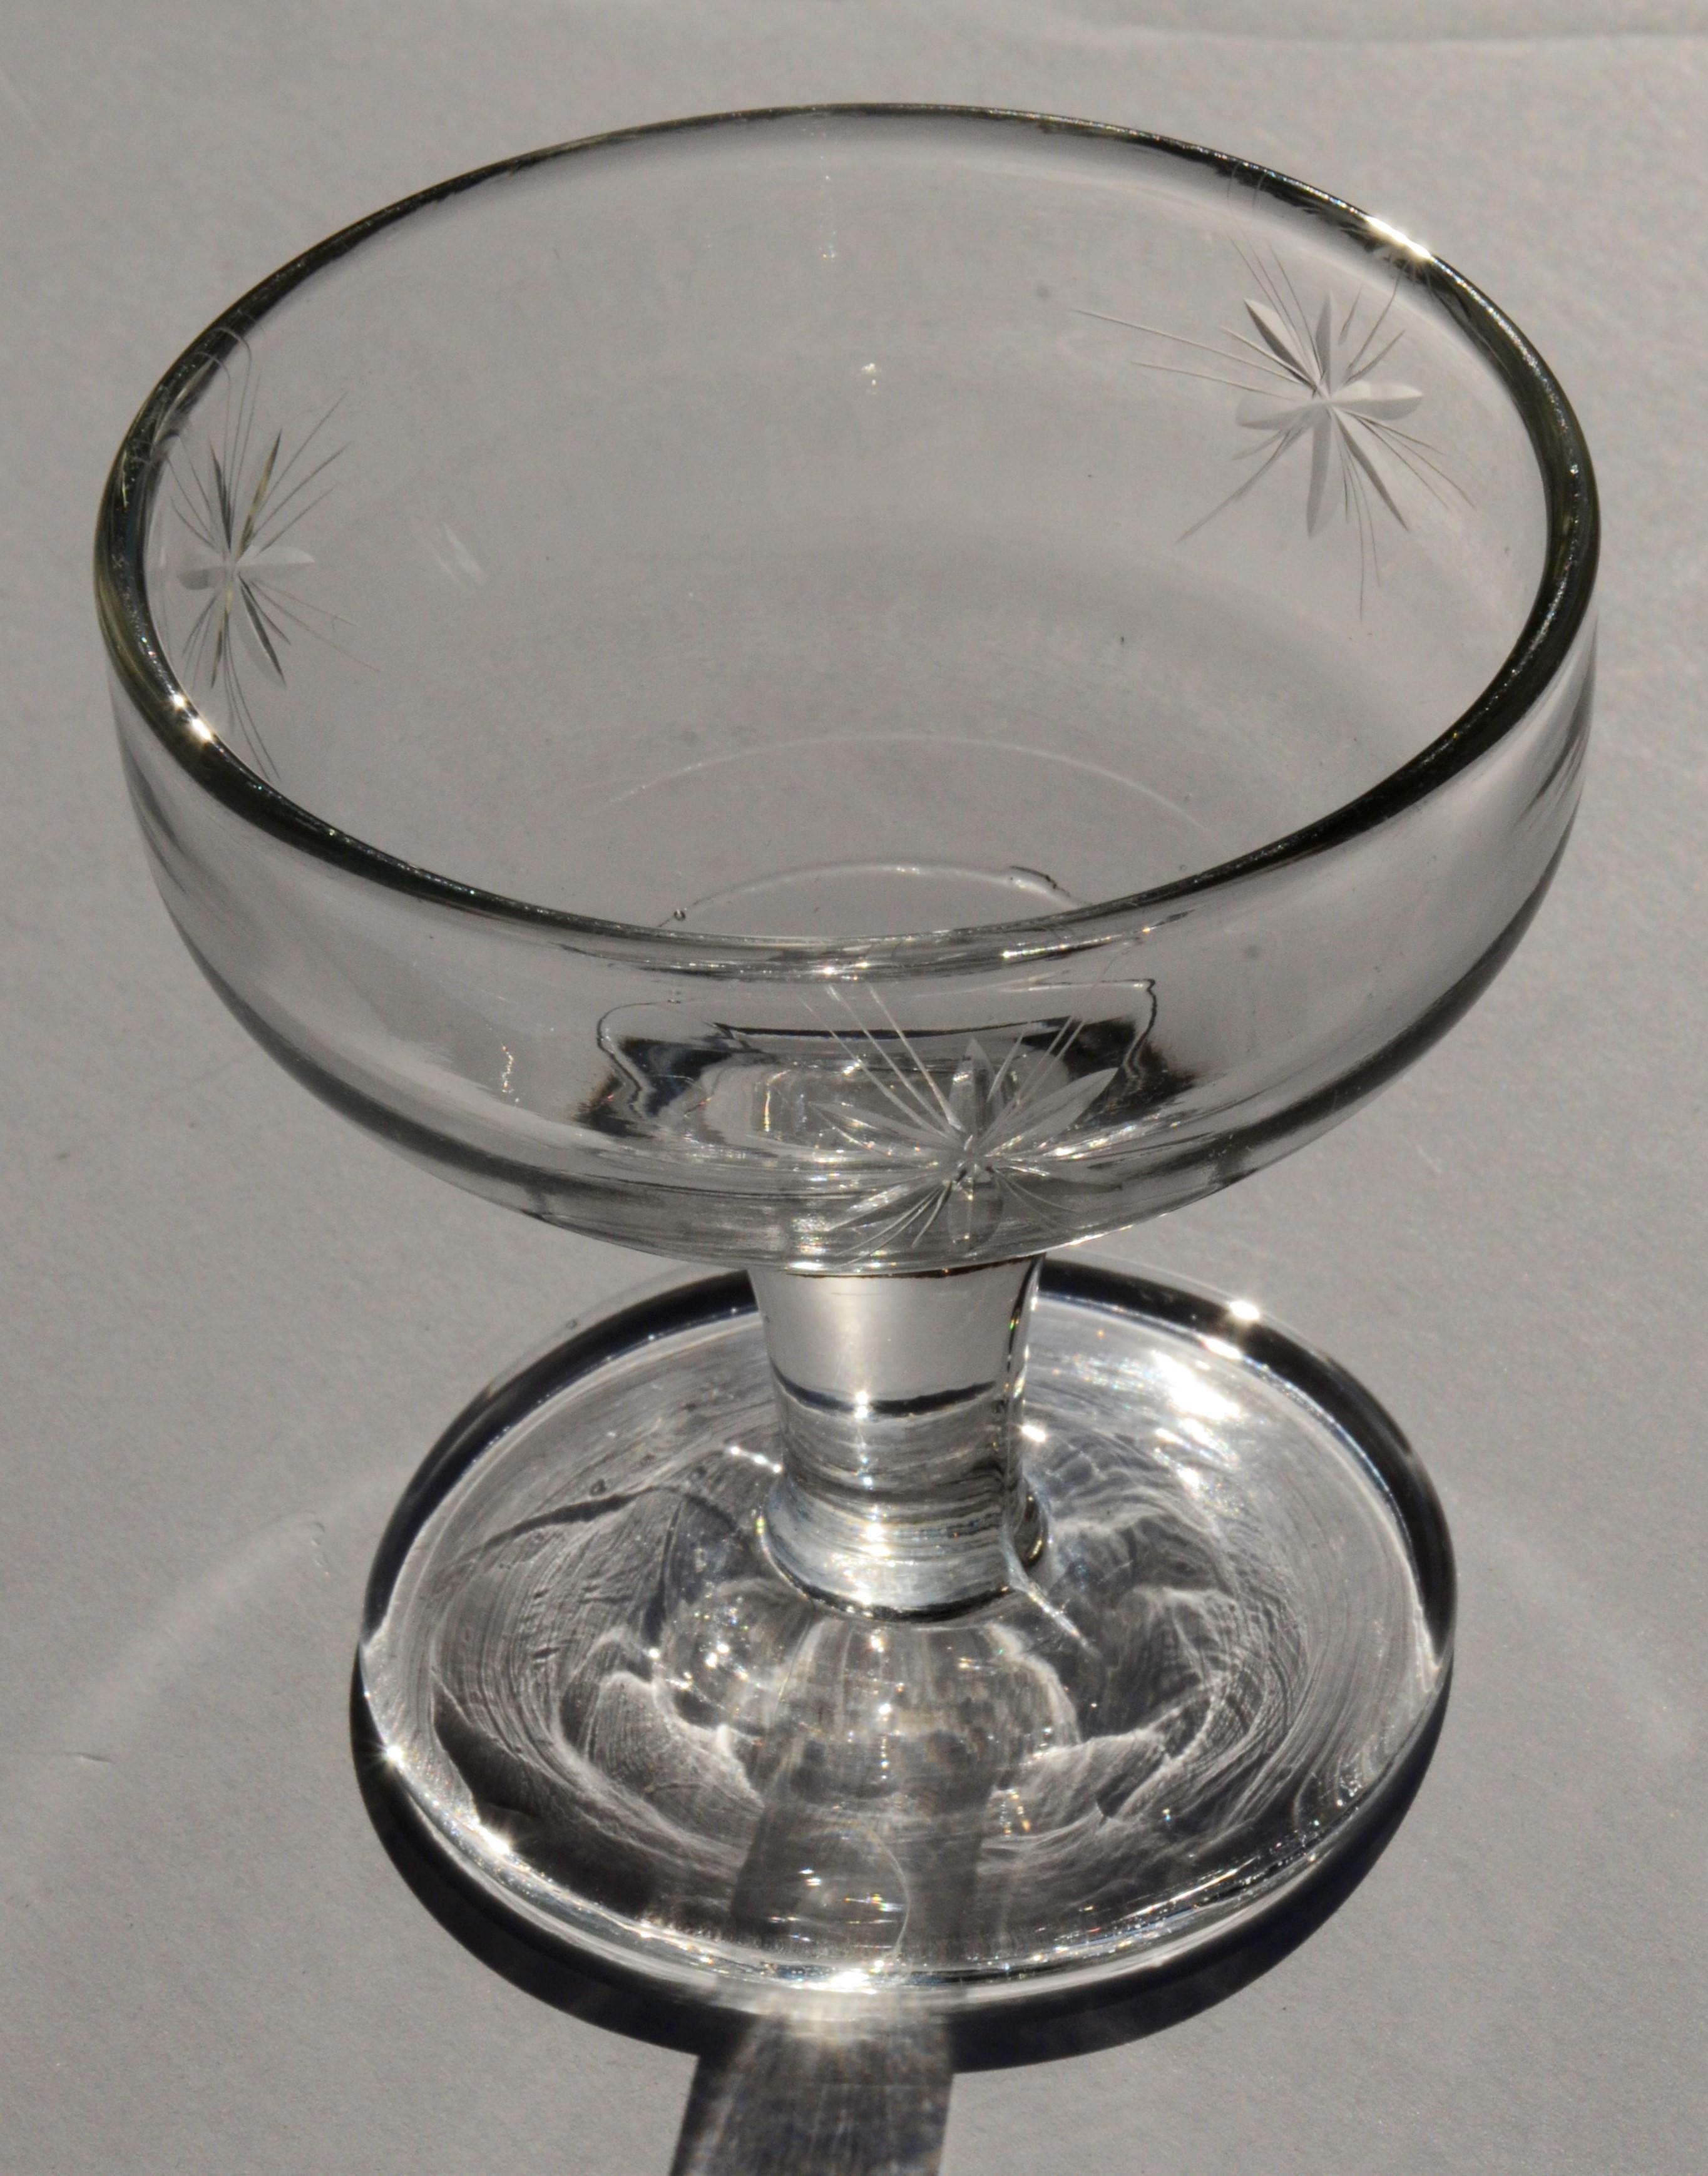 Offered is a set of six Mid-Century Modern starburst etched glass champagne coupes. Judging from the diminutive size of the glass and the style, this set of glass champagne coupes were manufactured in the mid-20th century. Perfect 